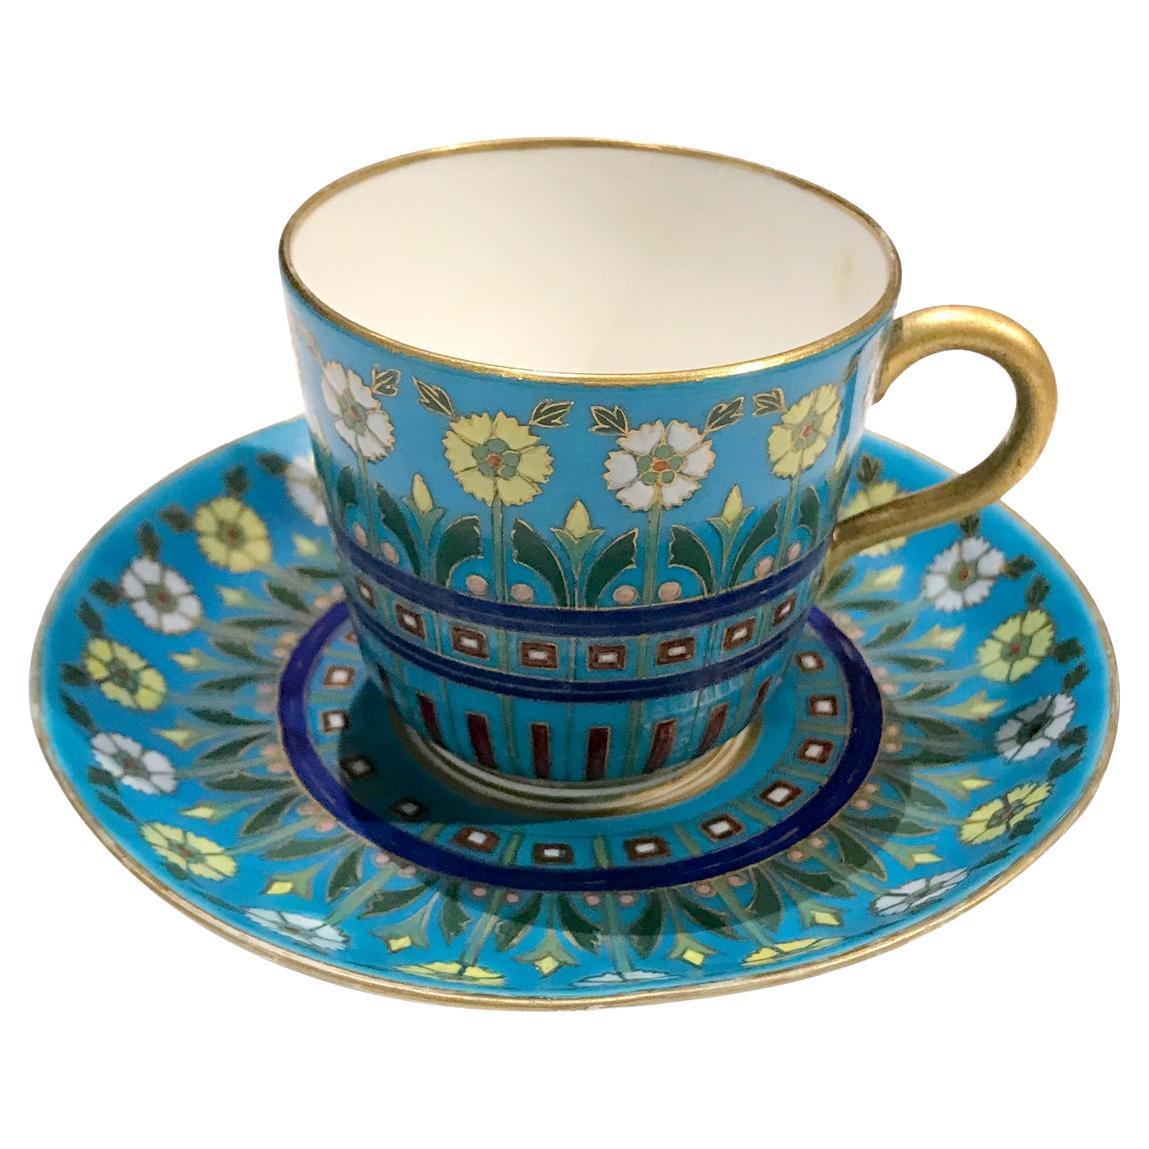 Minton Cloisonné Style Coffee Cup Attributed to Christopher Dresser For Sale